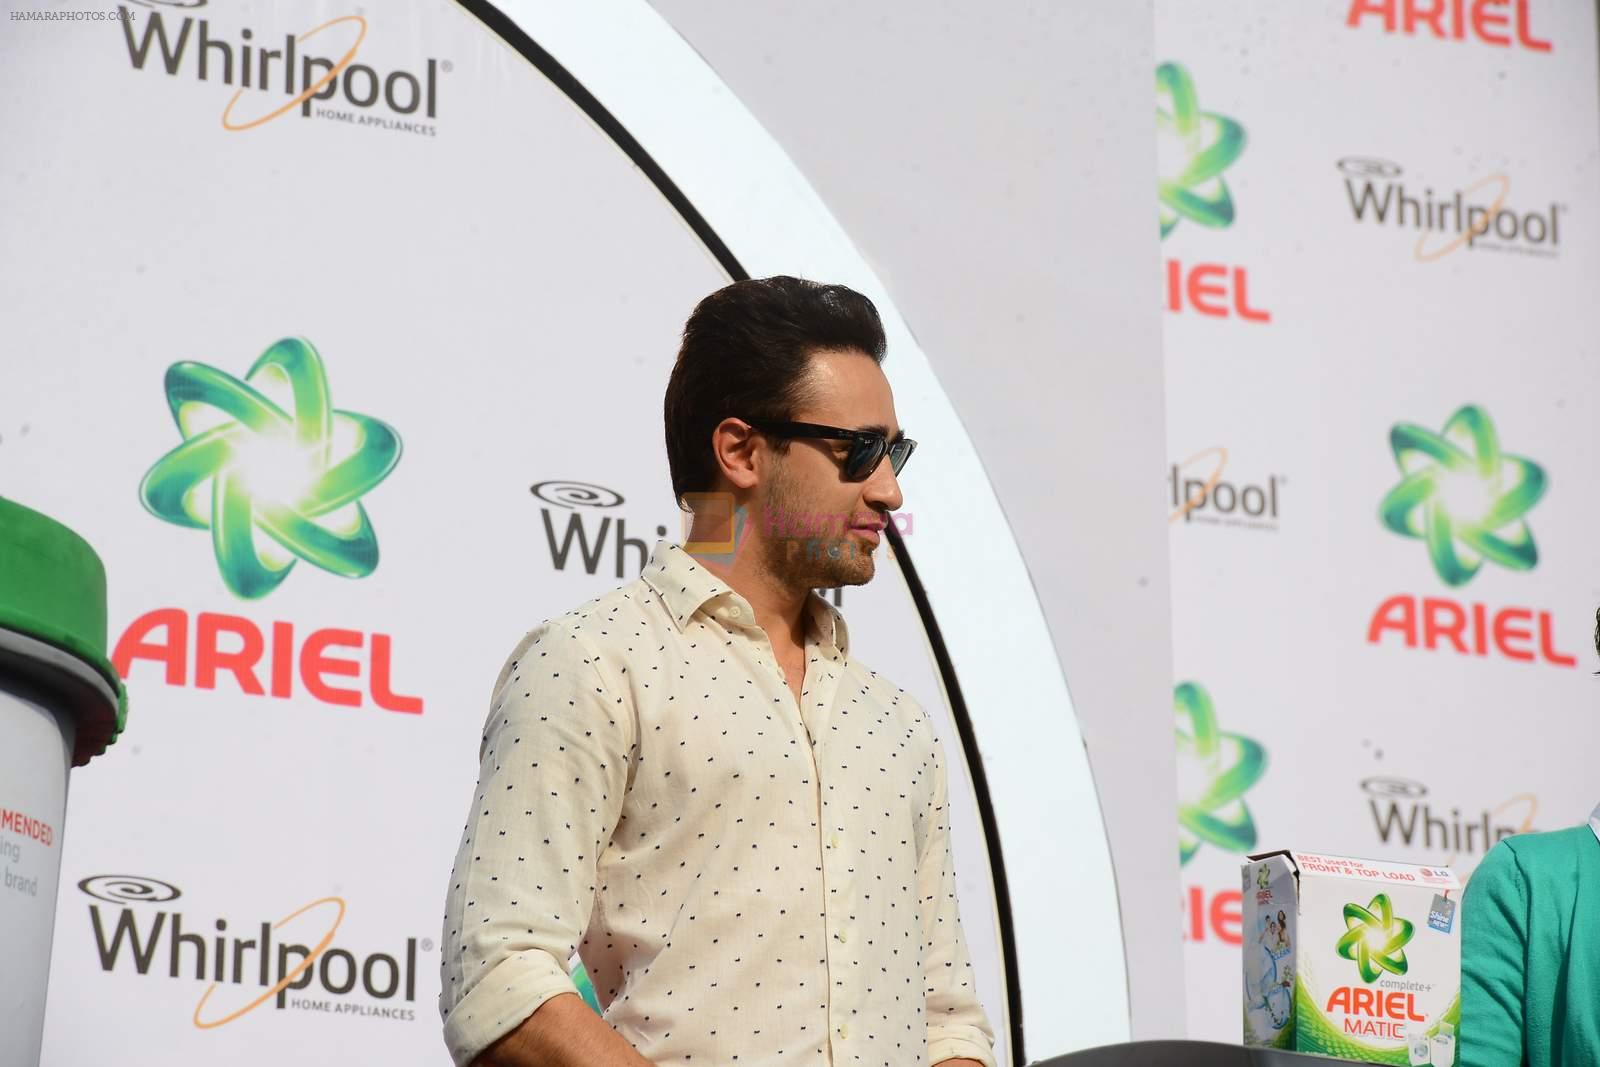 Imran Khan snapped at a product promotion event on 9th May 2015